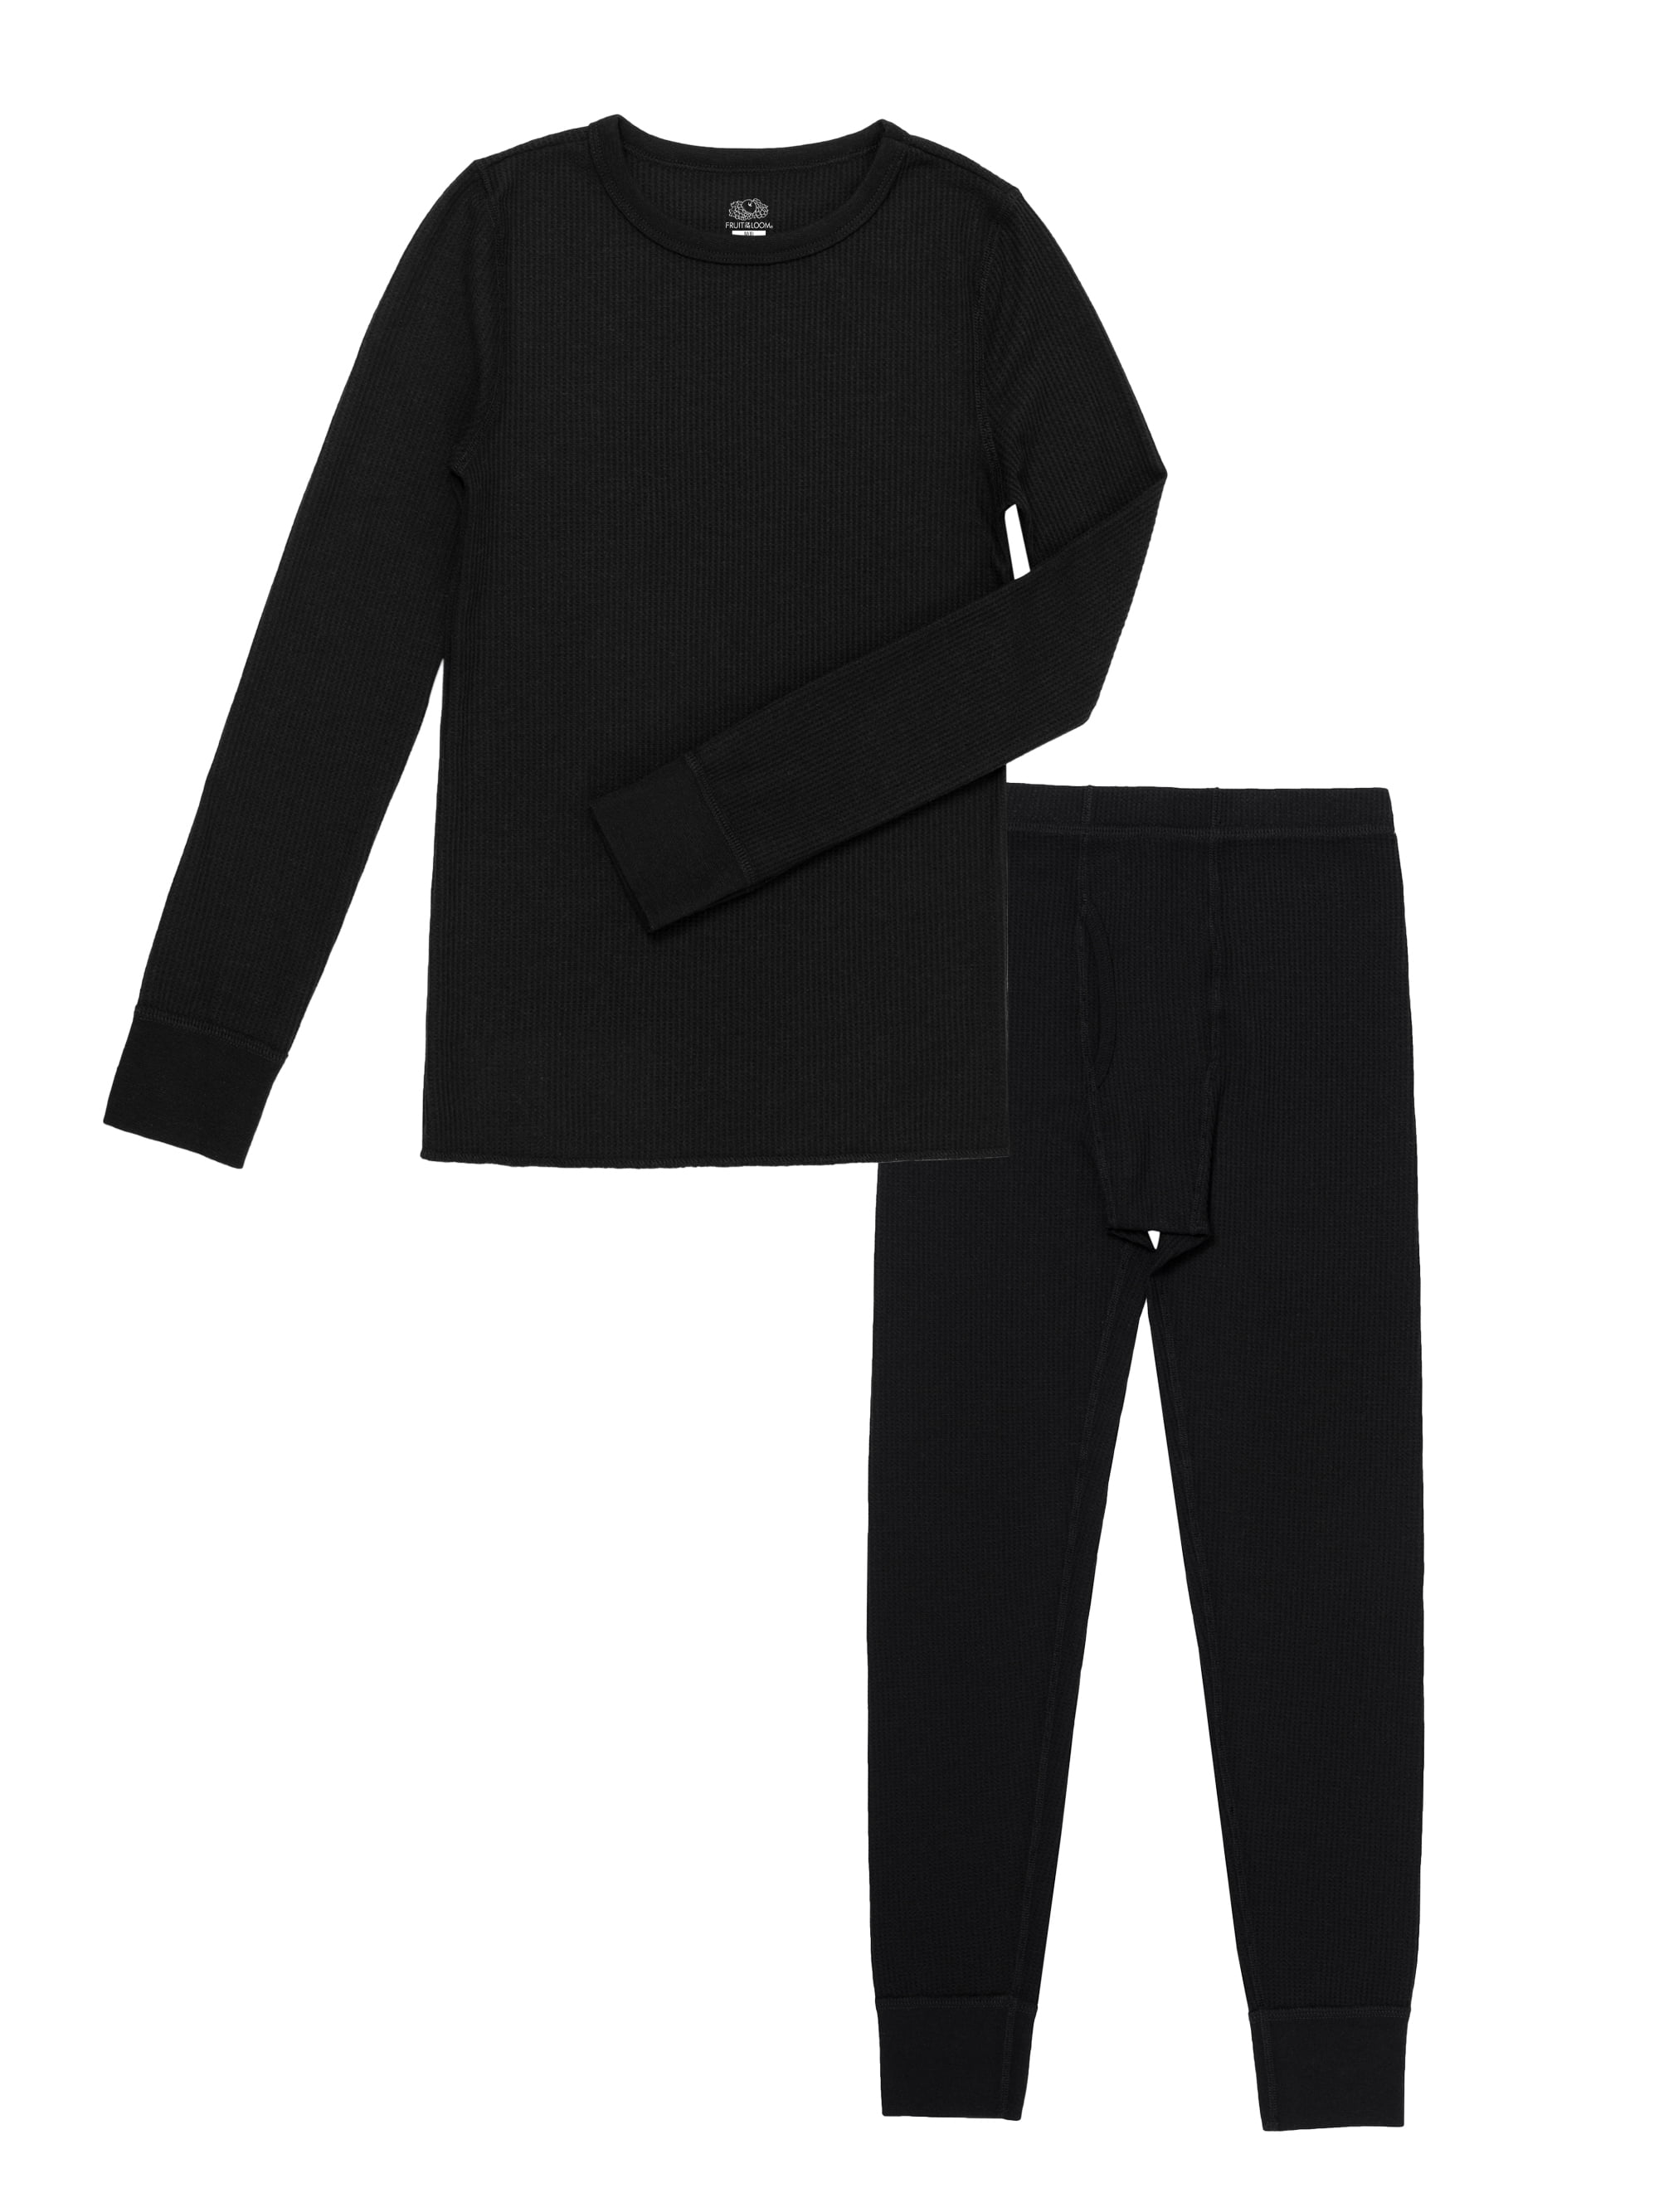 4 Piece Brushed Fleece Top and Long Johns Only Boys Thermal Underwear Set 2T-16 